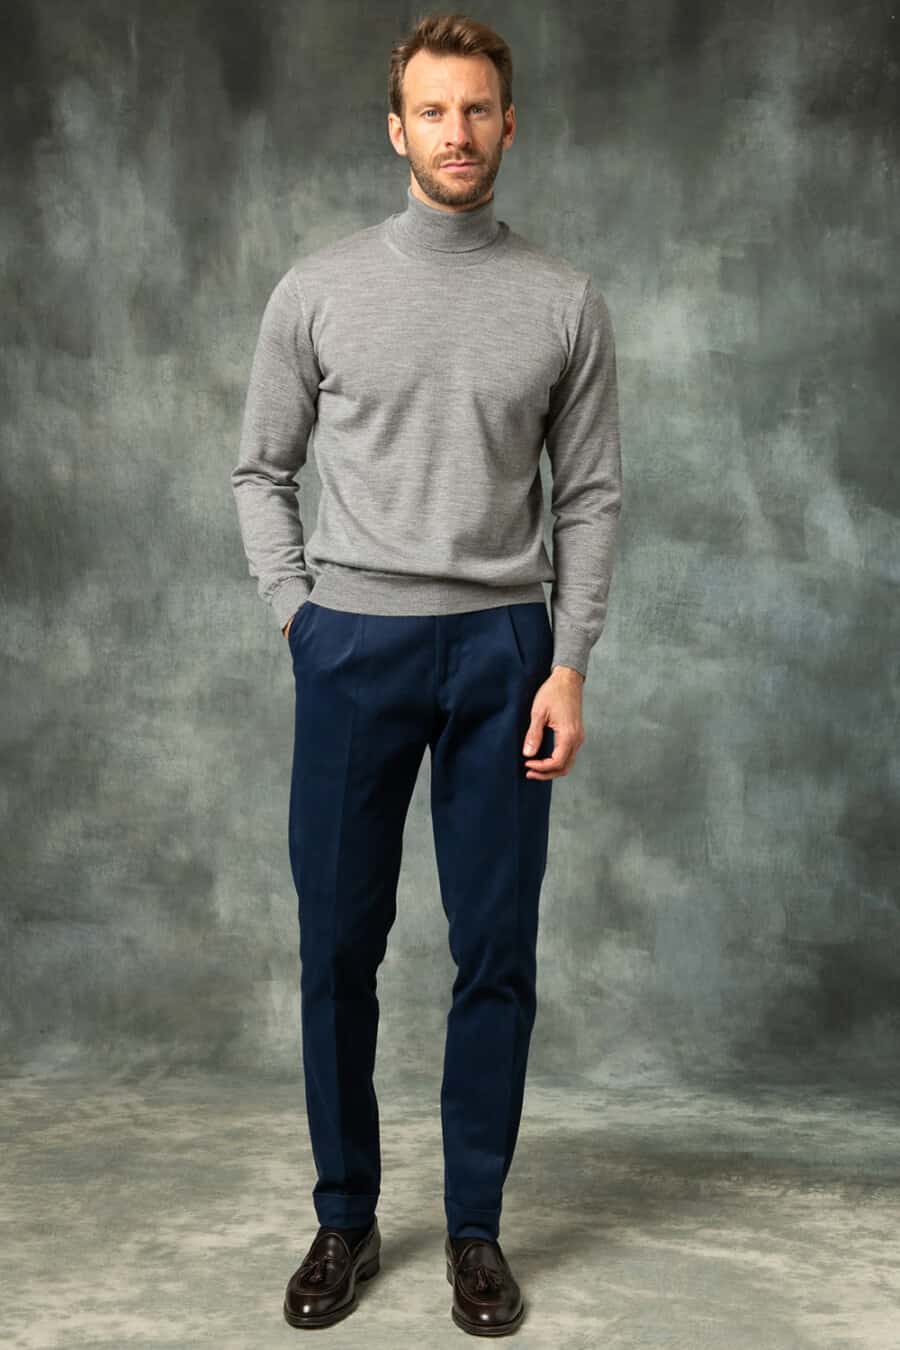 Men's navy pleated trousers, grey turtleneck and shiny tassel loafers outfit